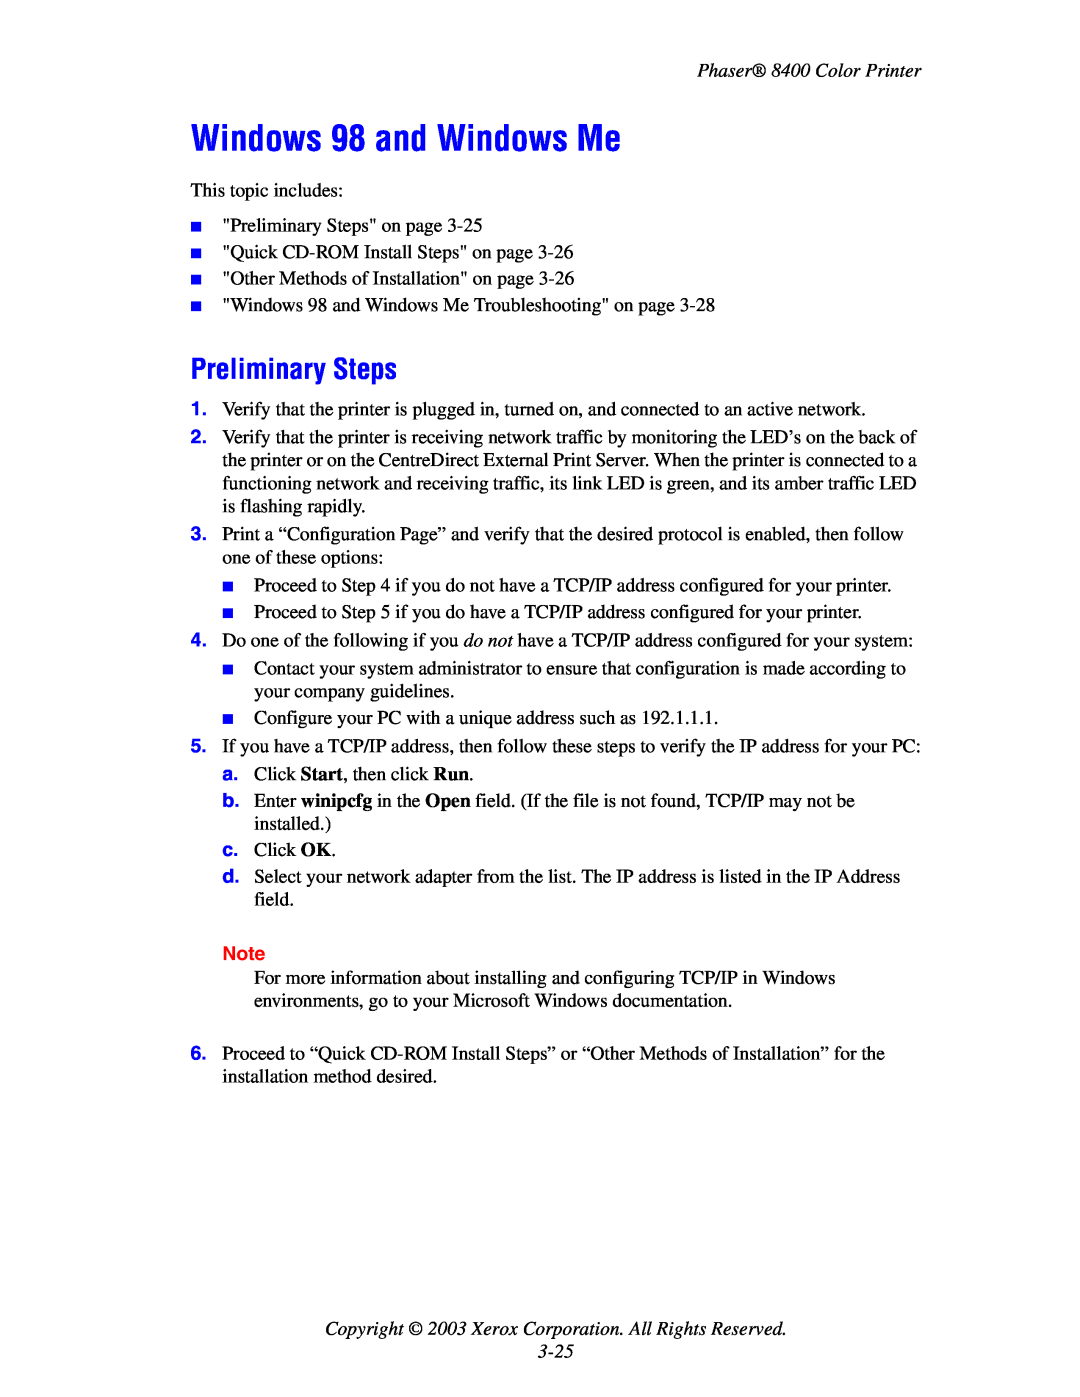 Xerox manual Preliminary Steps, Phaser 8400 Color Printer, 3-25, Windows 98 and Windows Me 